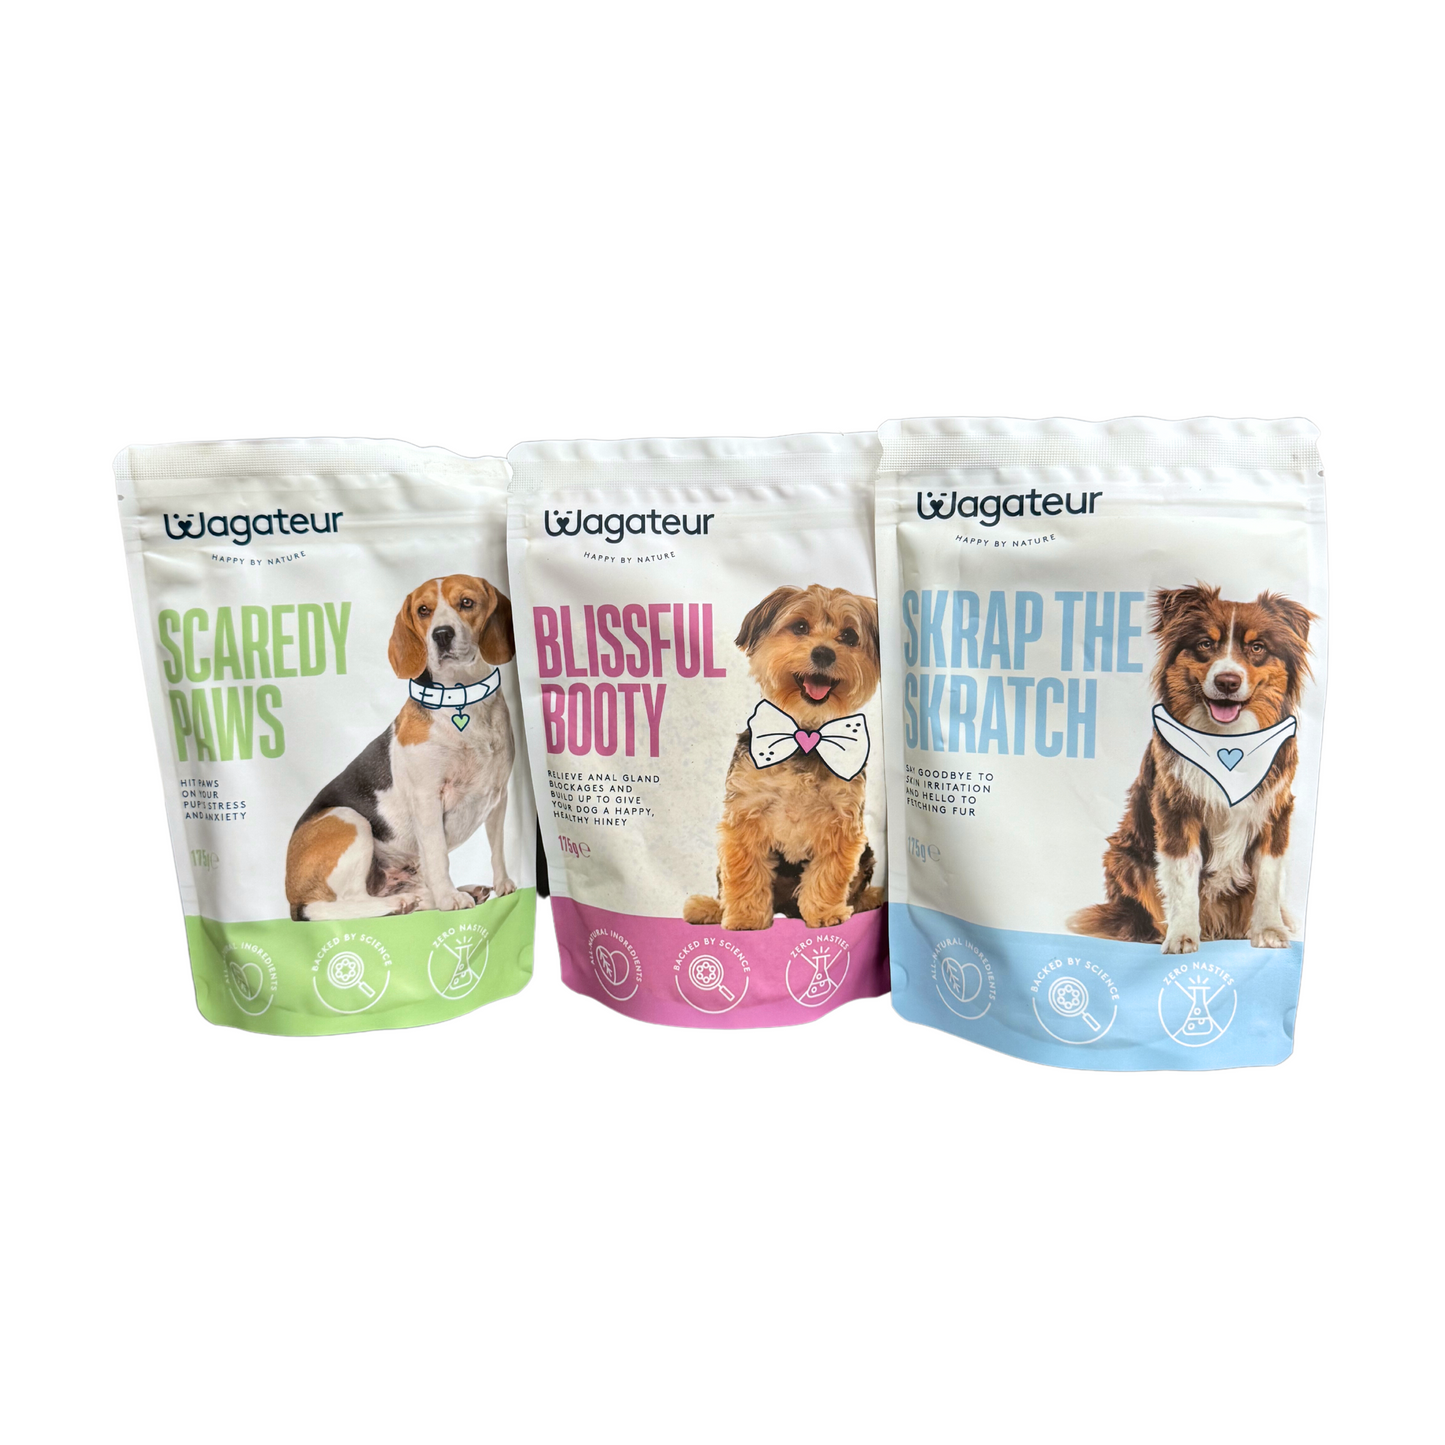 Complete Canine Care Multi-Pack - Save 20%